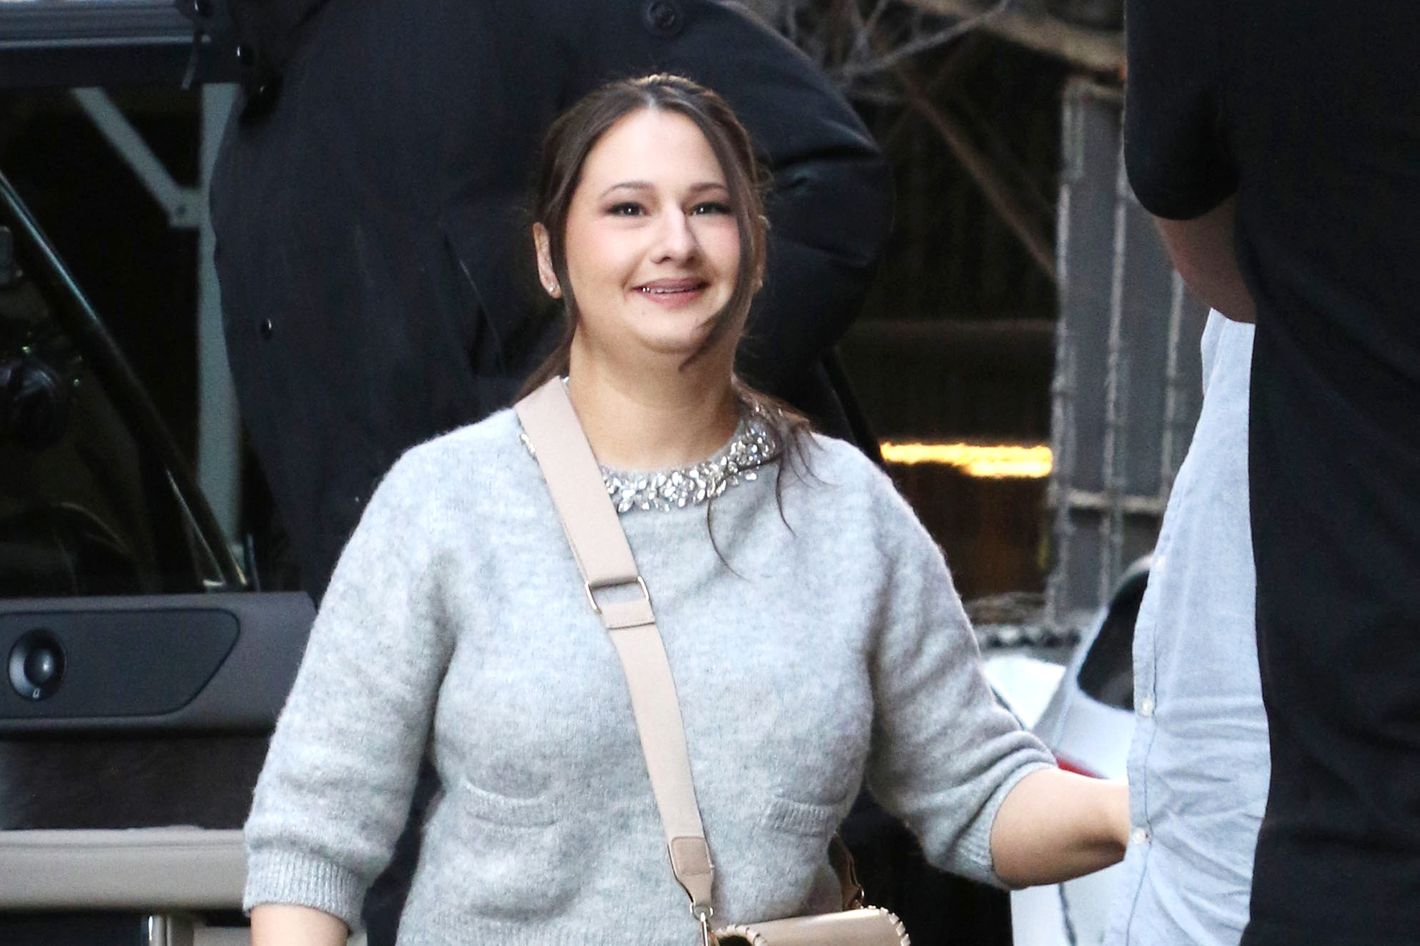 Gypsy Rose Blanchard Is Dating Her Ex-Fiancé